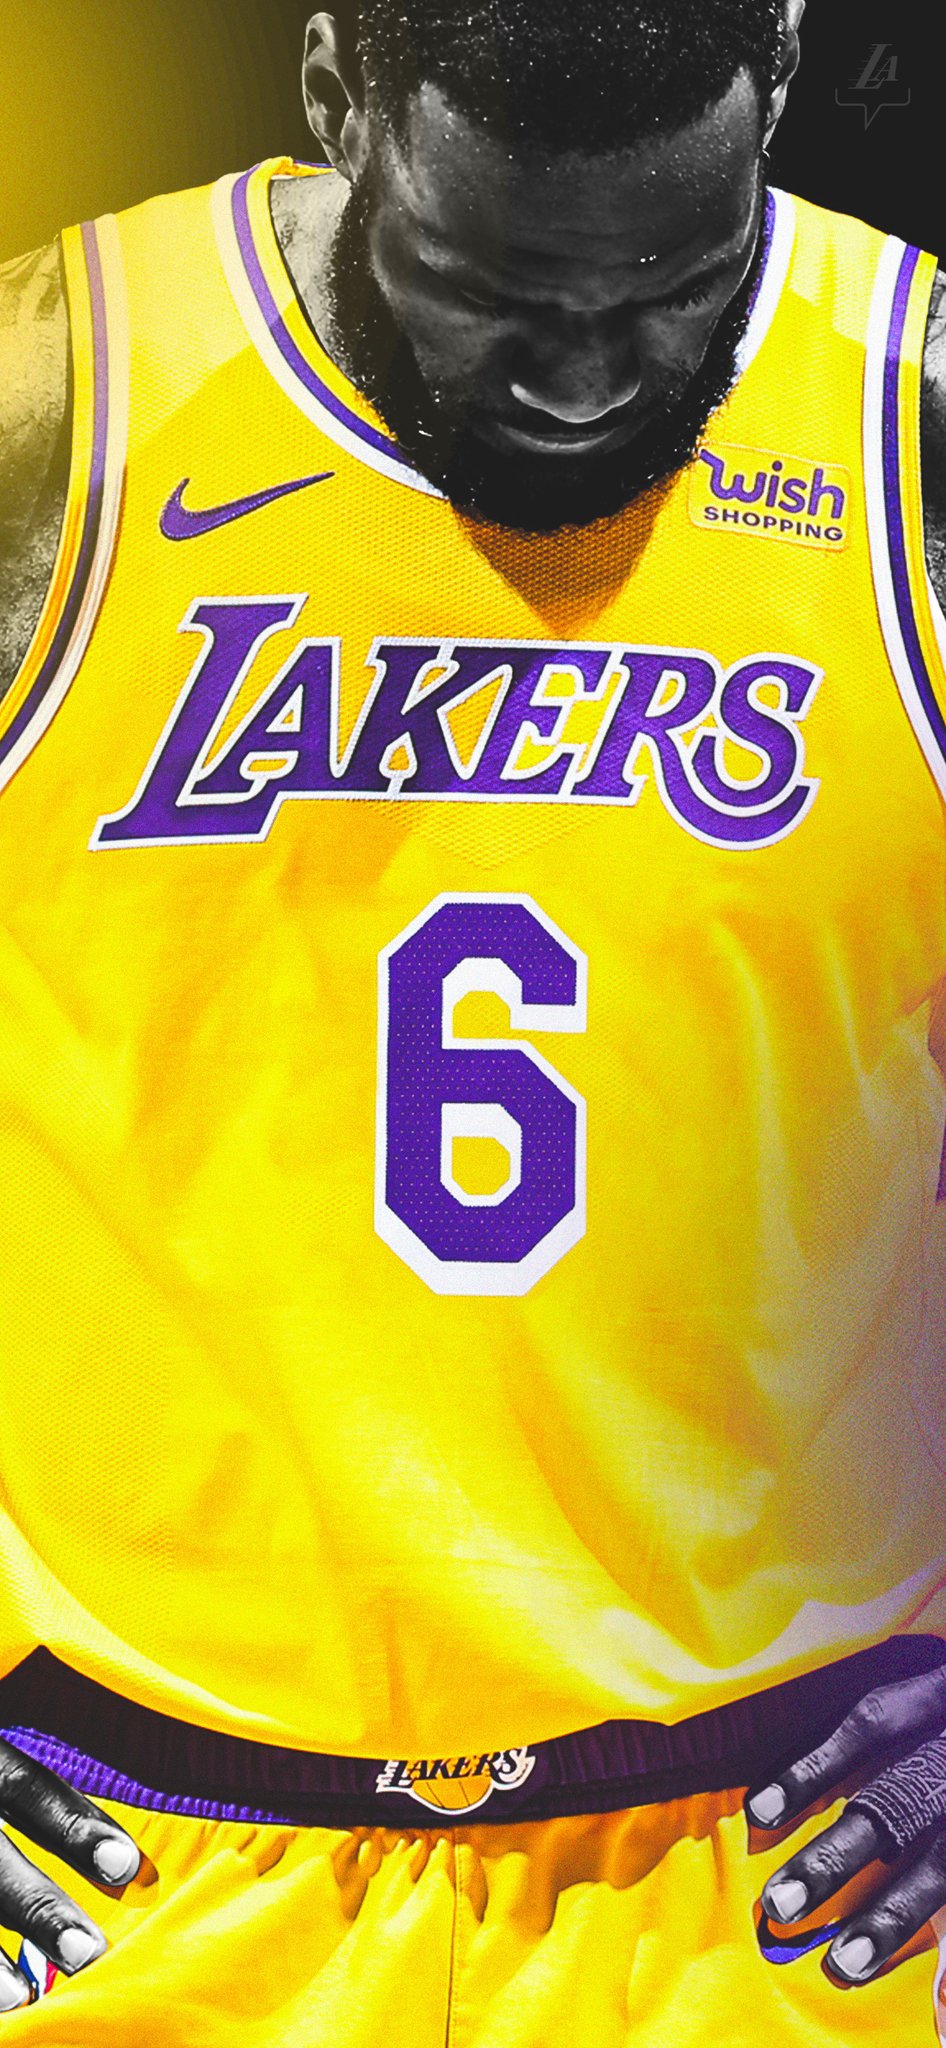 Lakers' LeBron James moves on from No. 23 jersey, changes back to No. 6